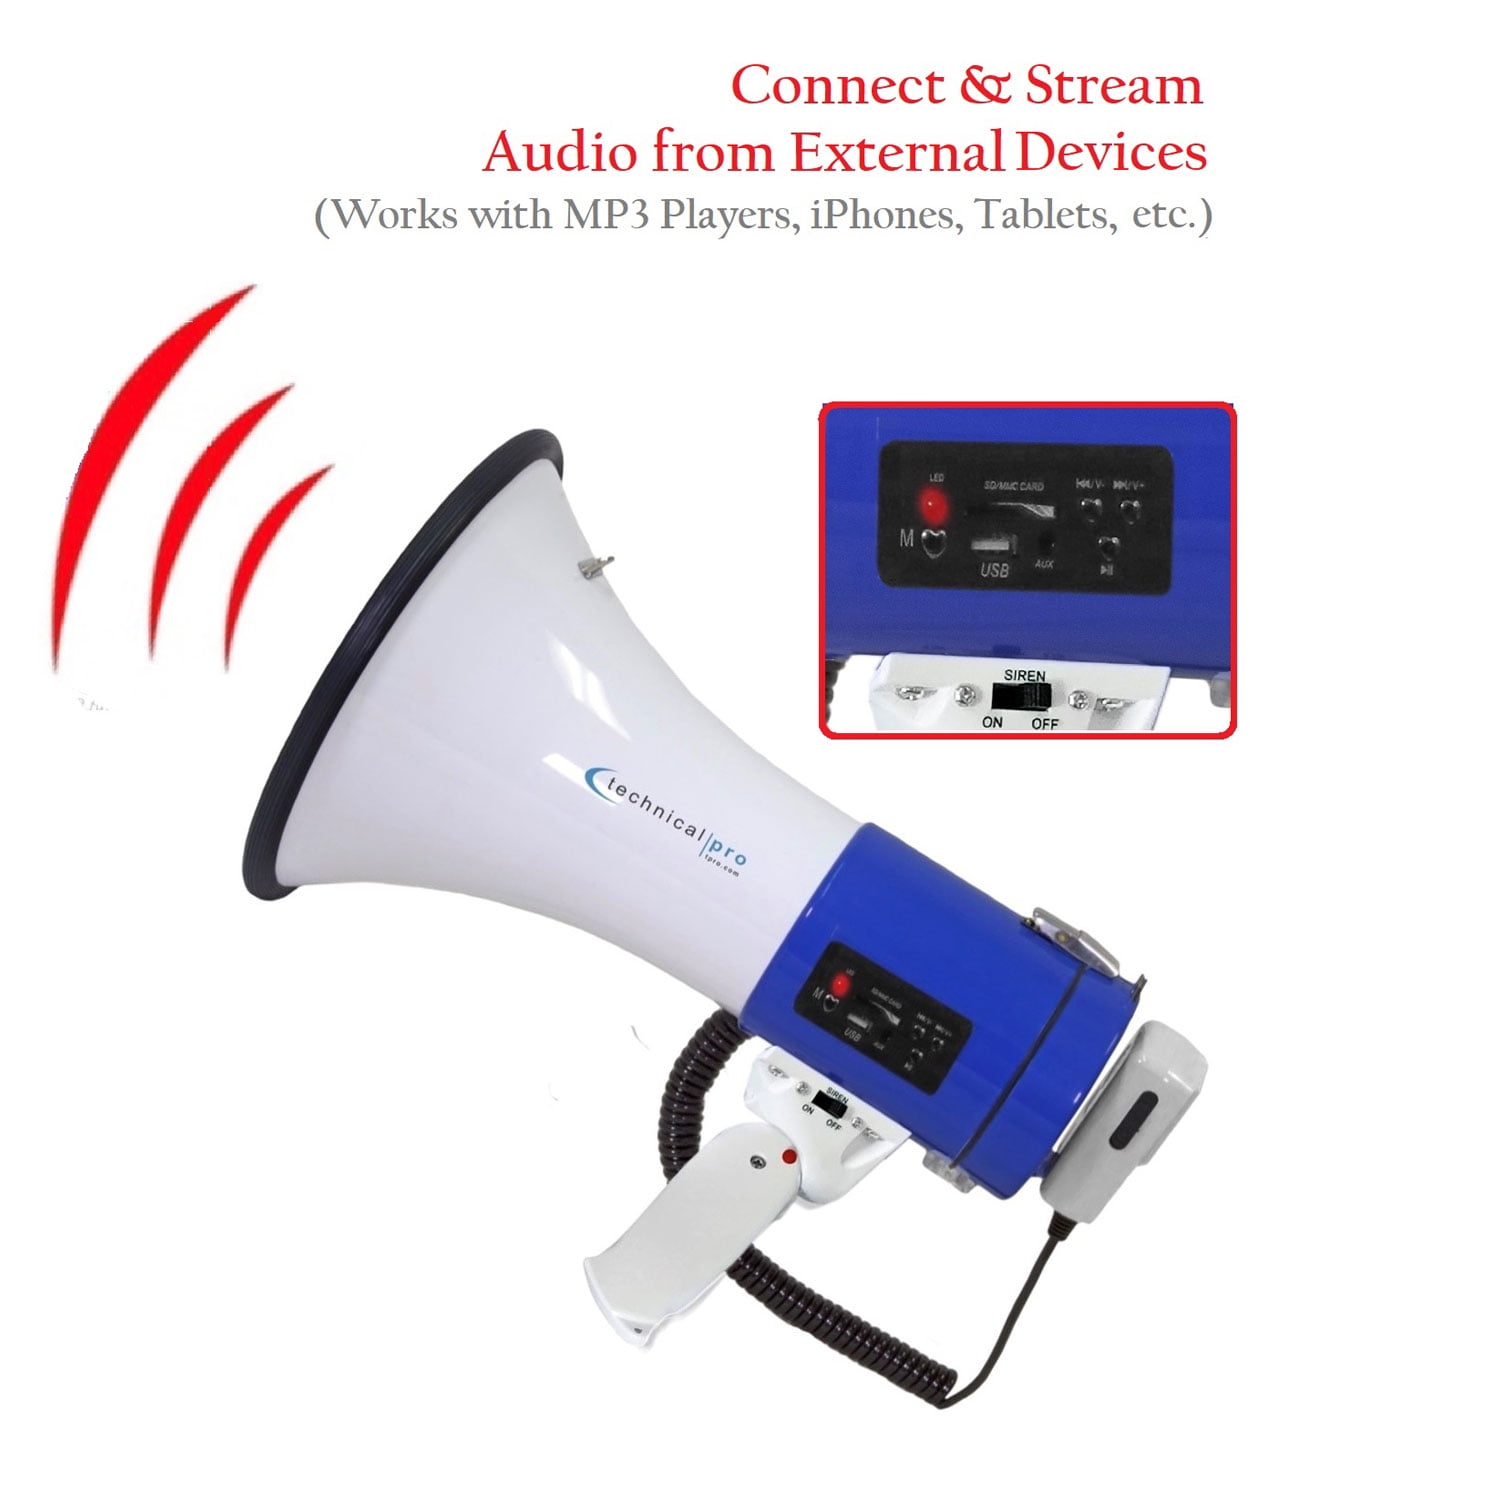 AUX Input Perfect for Indoor/Outdoor Sporting Events and Crowd Control USB/SD/MMC Reader Loudmore 50 Watt Professional 15 Large Megaphone Bullhorn with Detachable Microphone Recording and Siren 